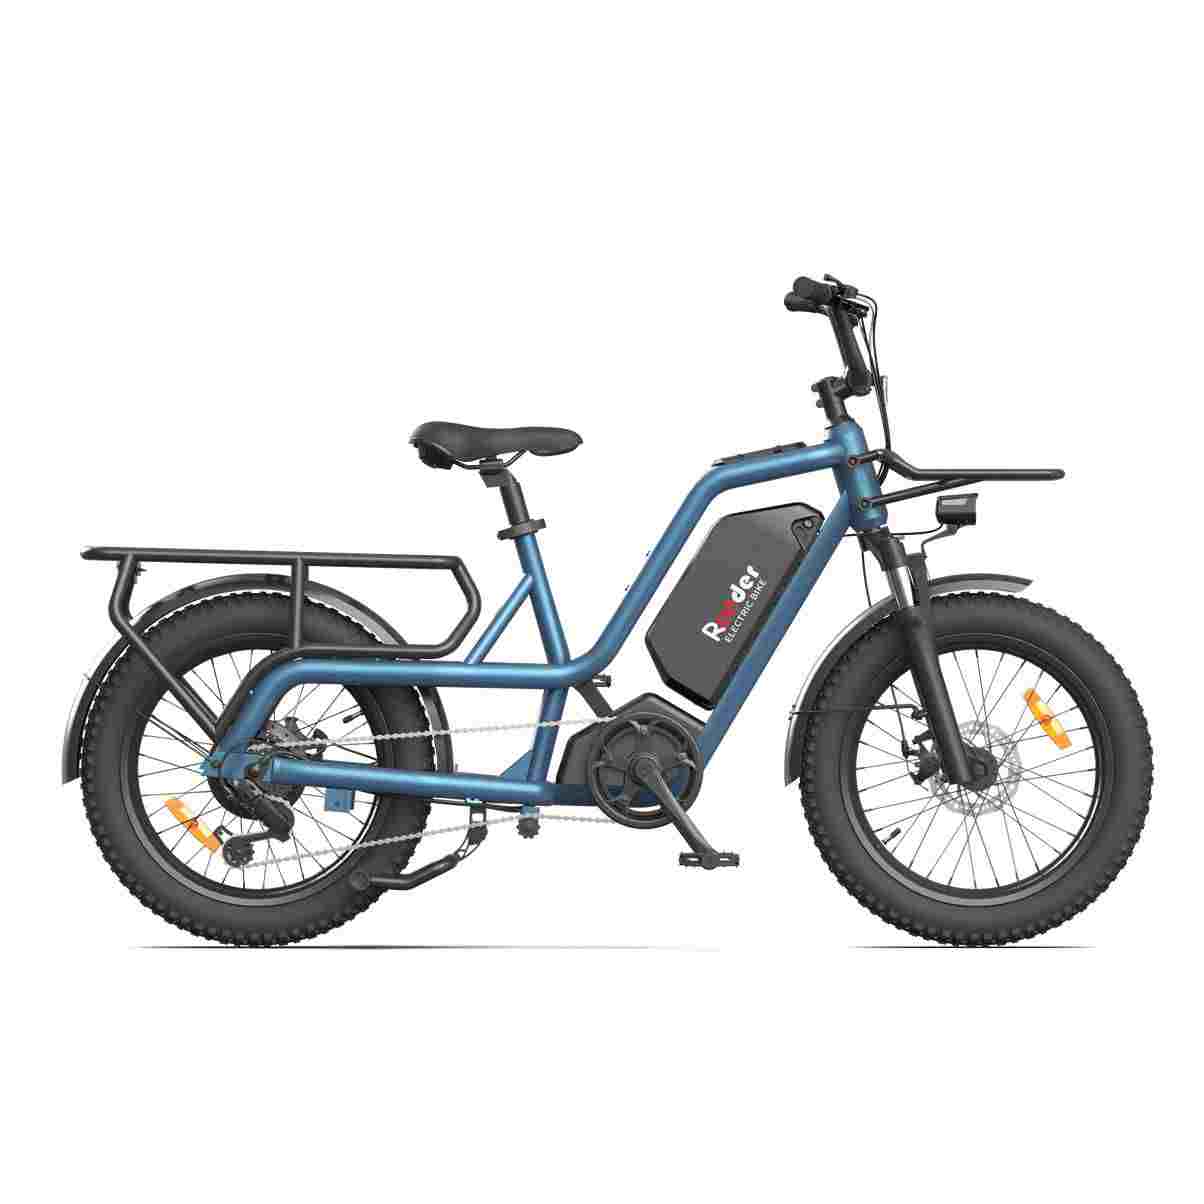 Scooter Electric Off Road wholesale price